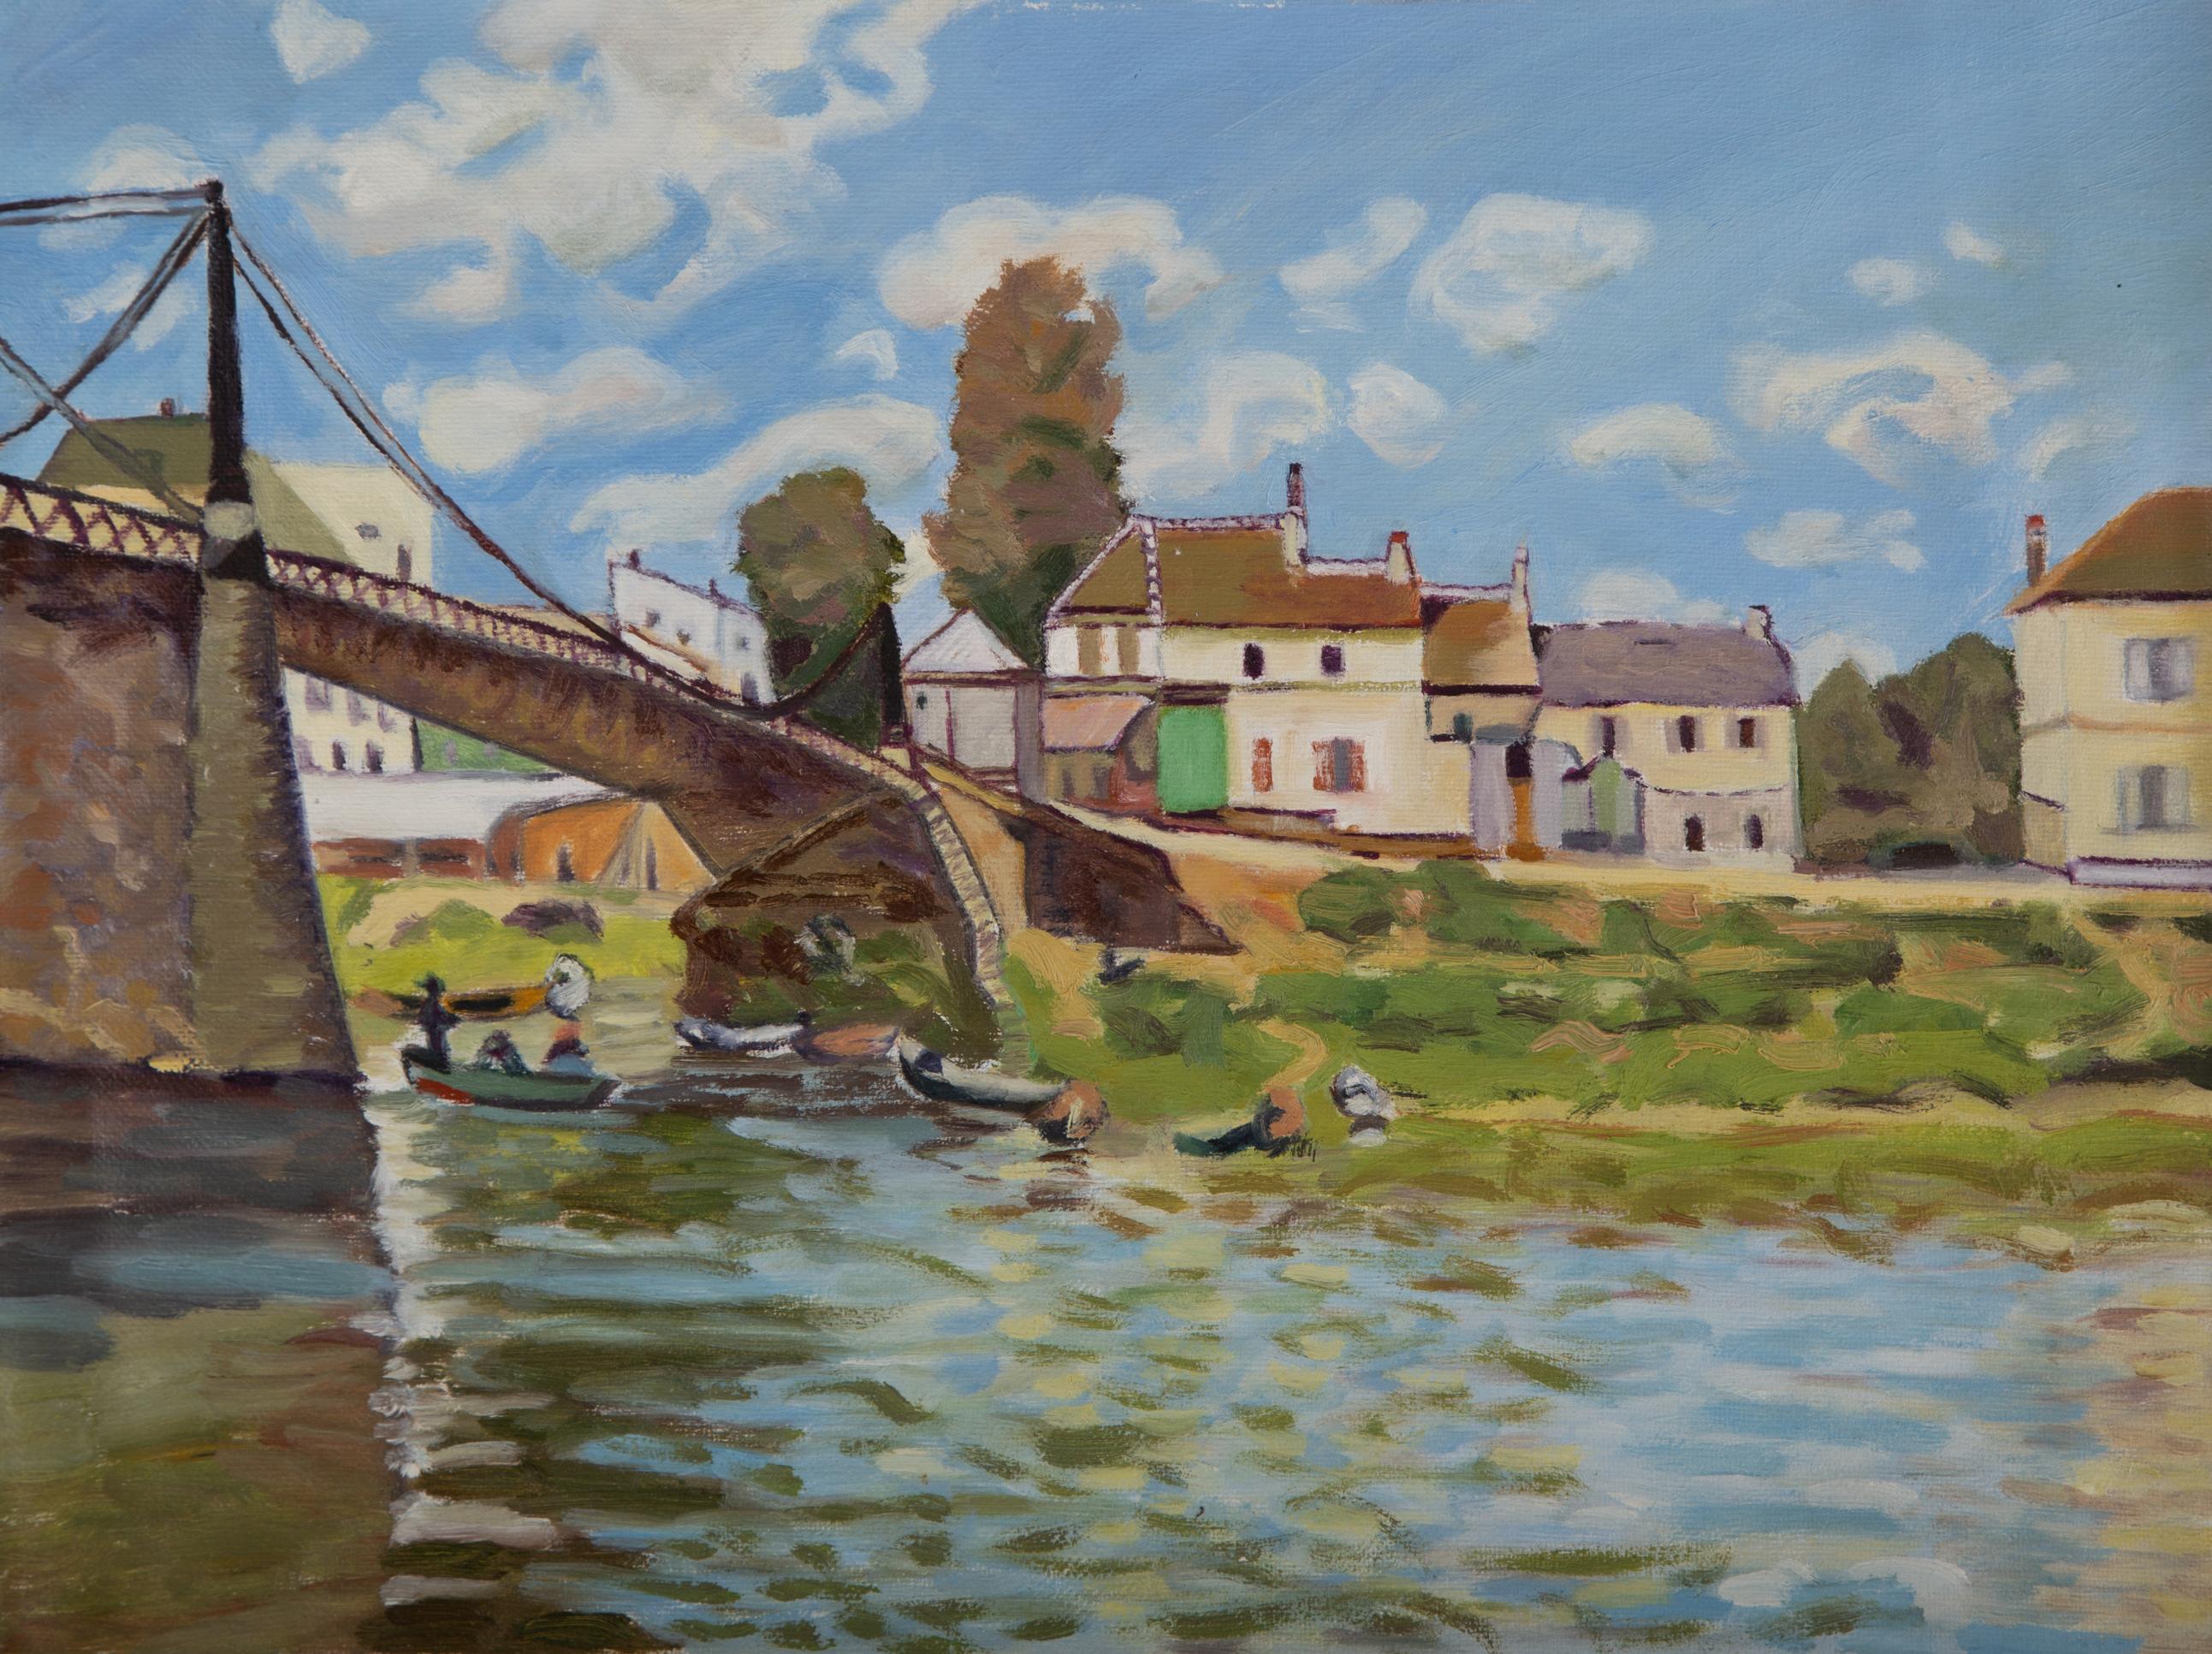 Title: Bridge
Medium: Oil on canvas
Size: 12 x 15.5 inches
Frame: Framing options available!
Condition: The painting appears to be in excellent condition.
Note: This painting is unstretched
Year: 2014
Artist: ChengJuan Wang
Signature: